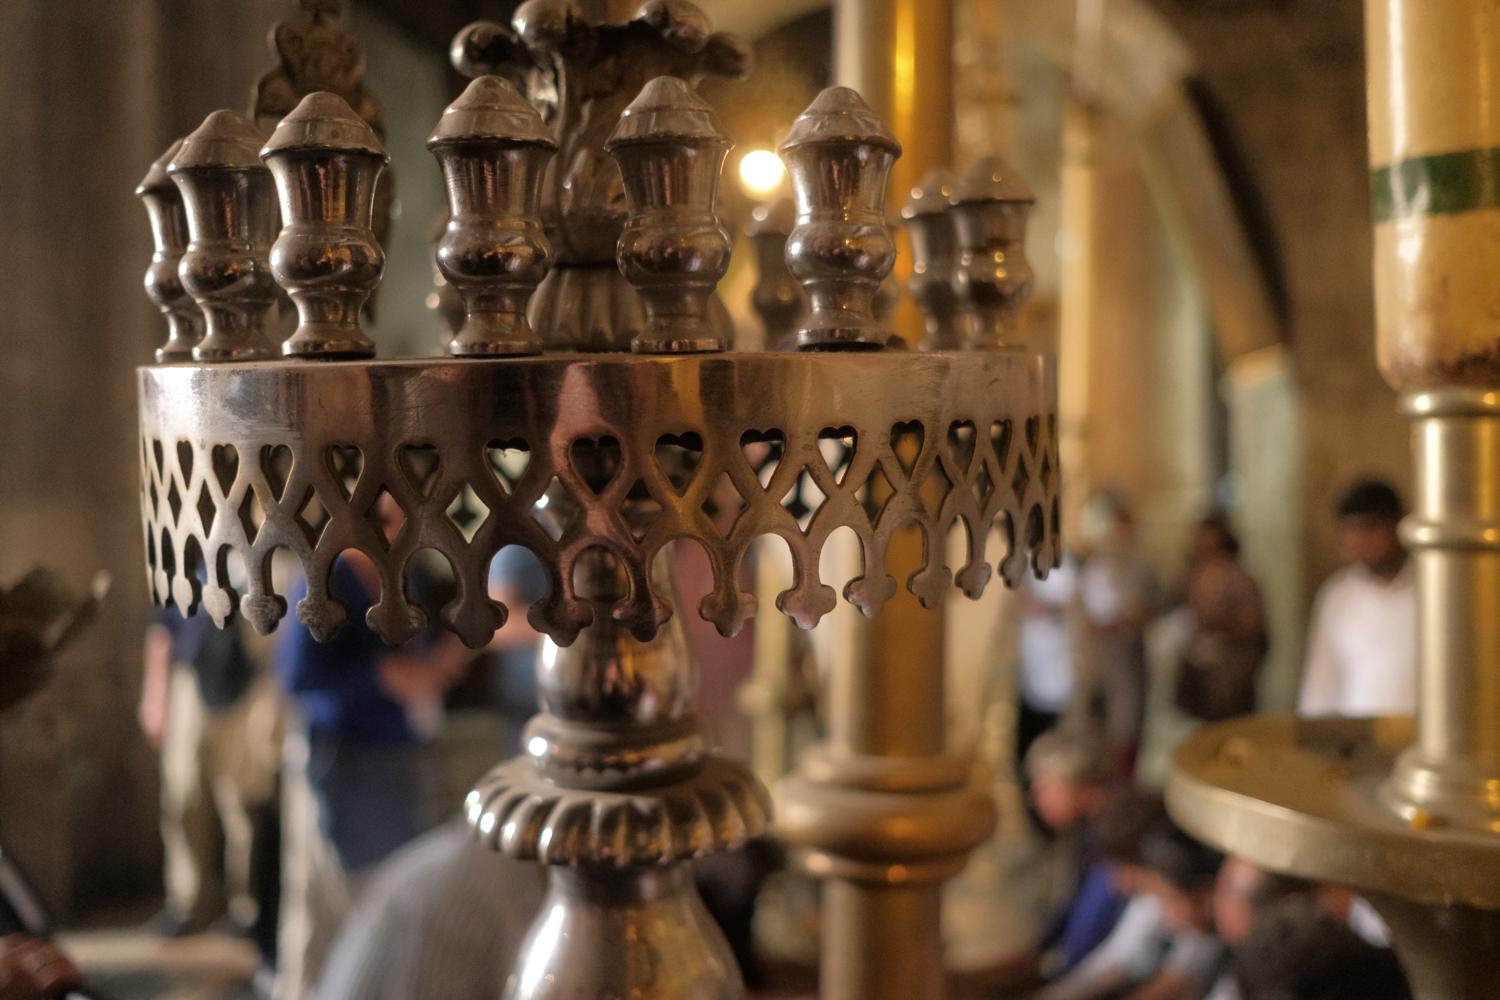 Church of the Holy Sepulchre - Metal Work